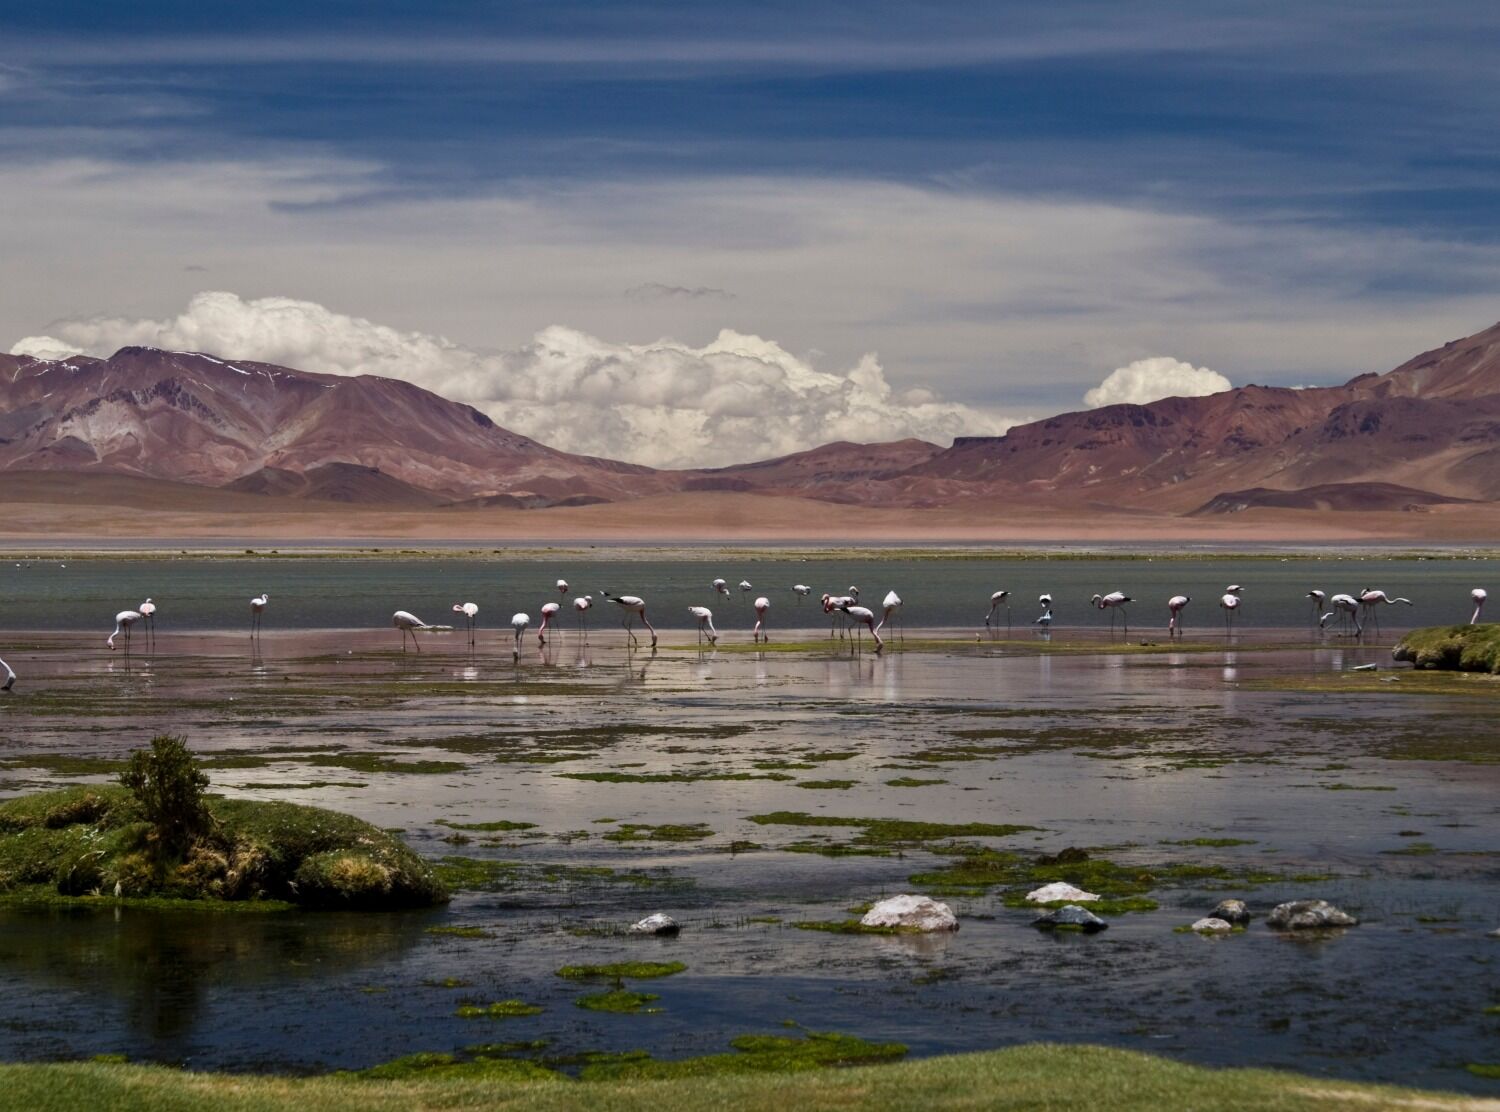 Los flamencos National Reserve in Chile